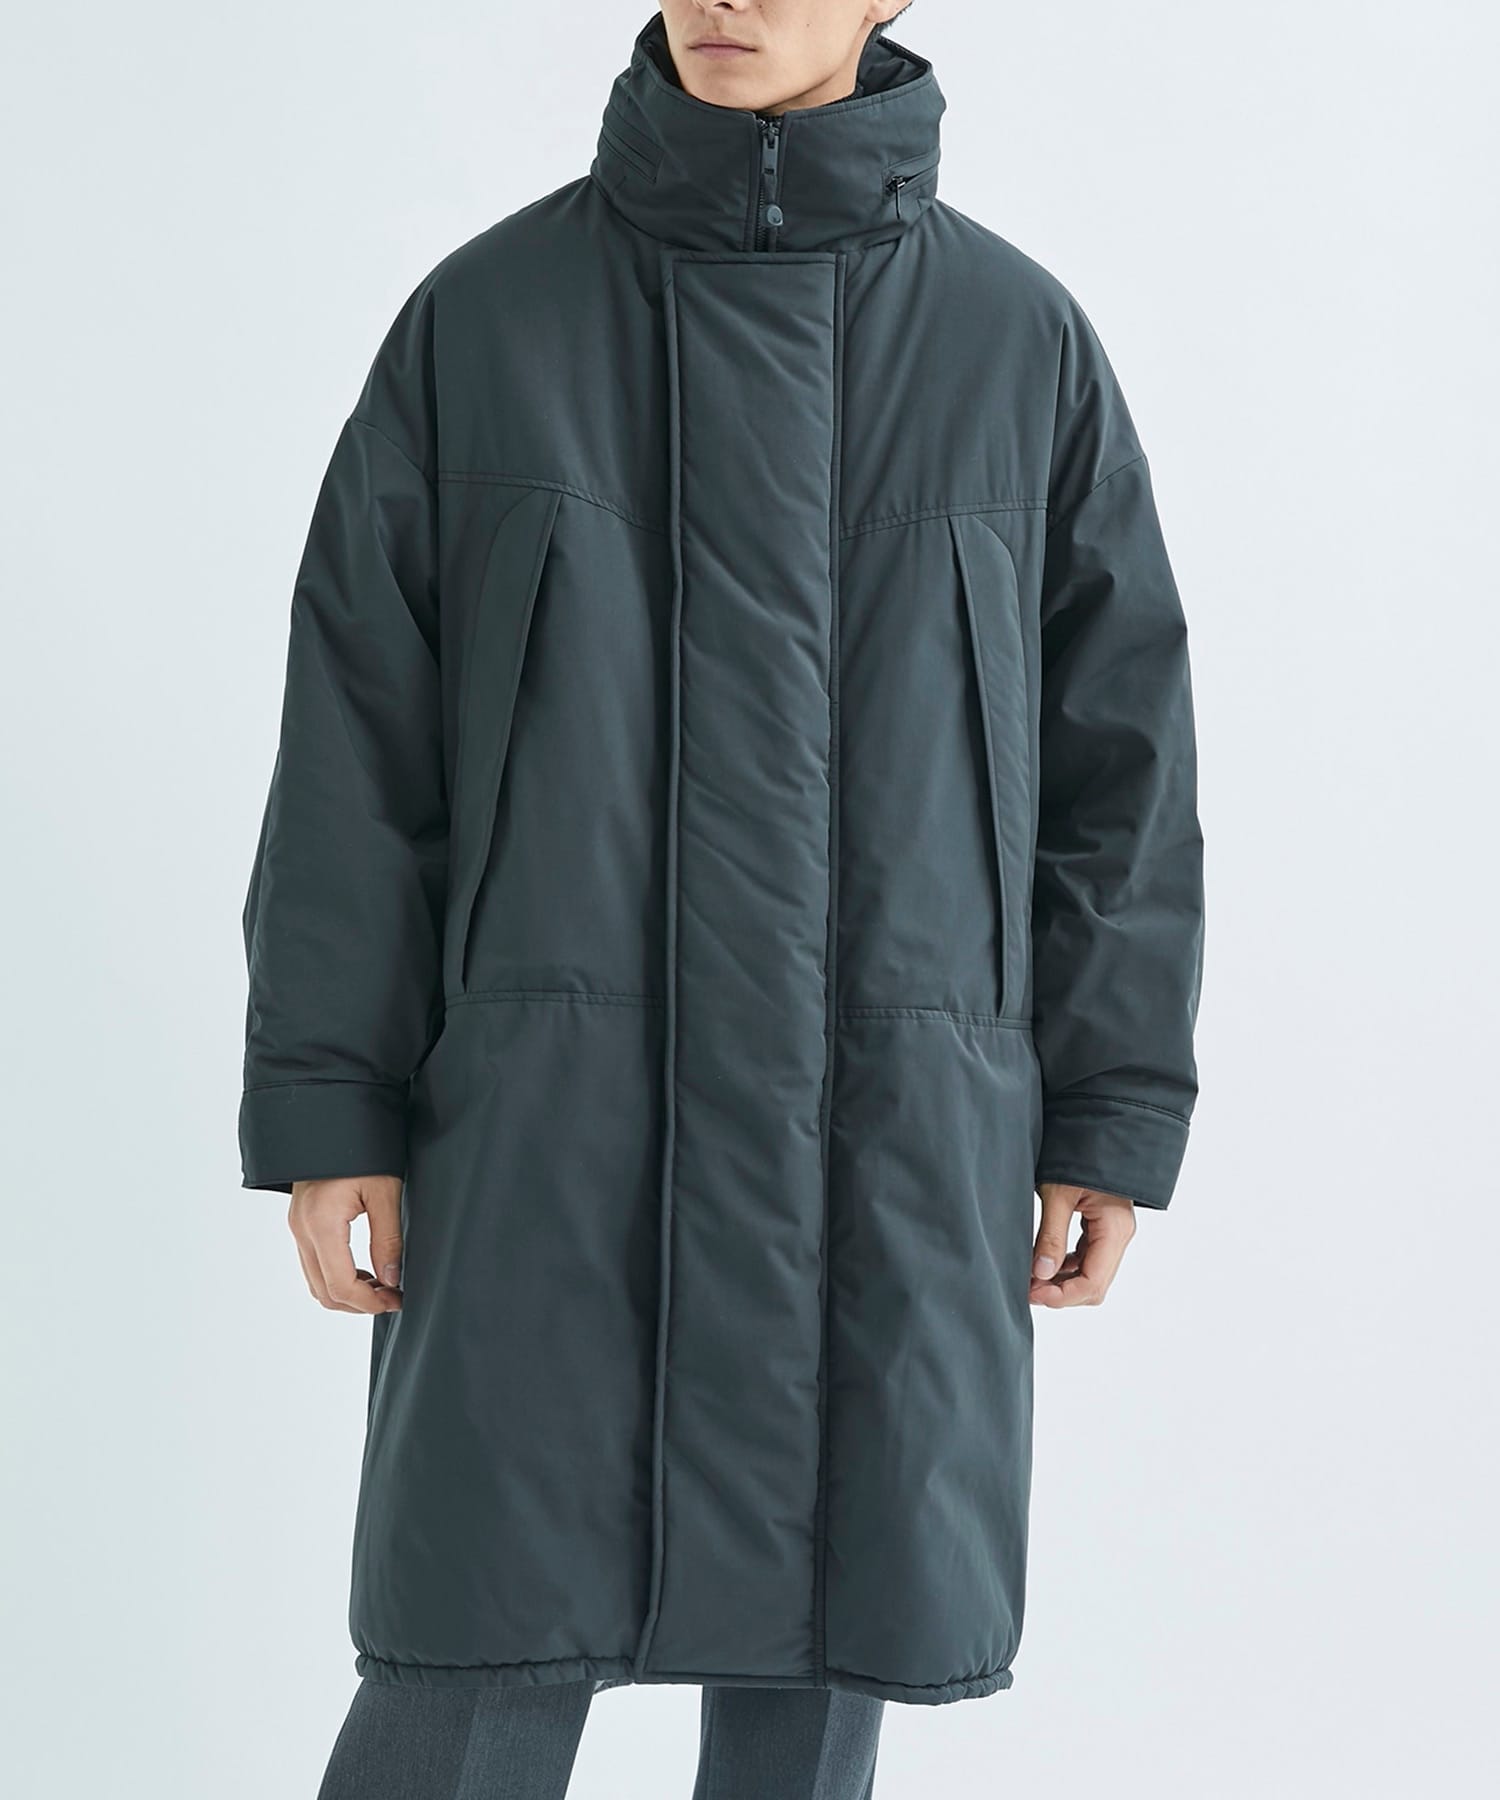 THE MONSTER PARKA｜THE RERACS